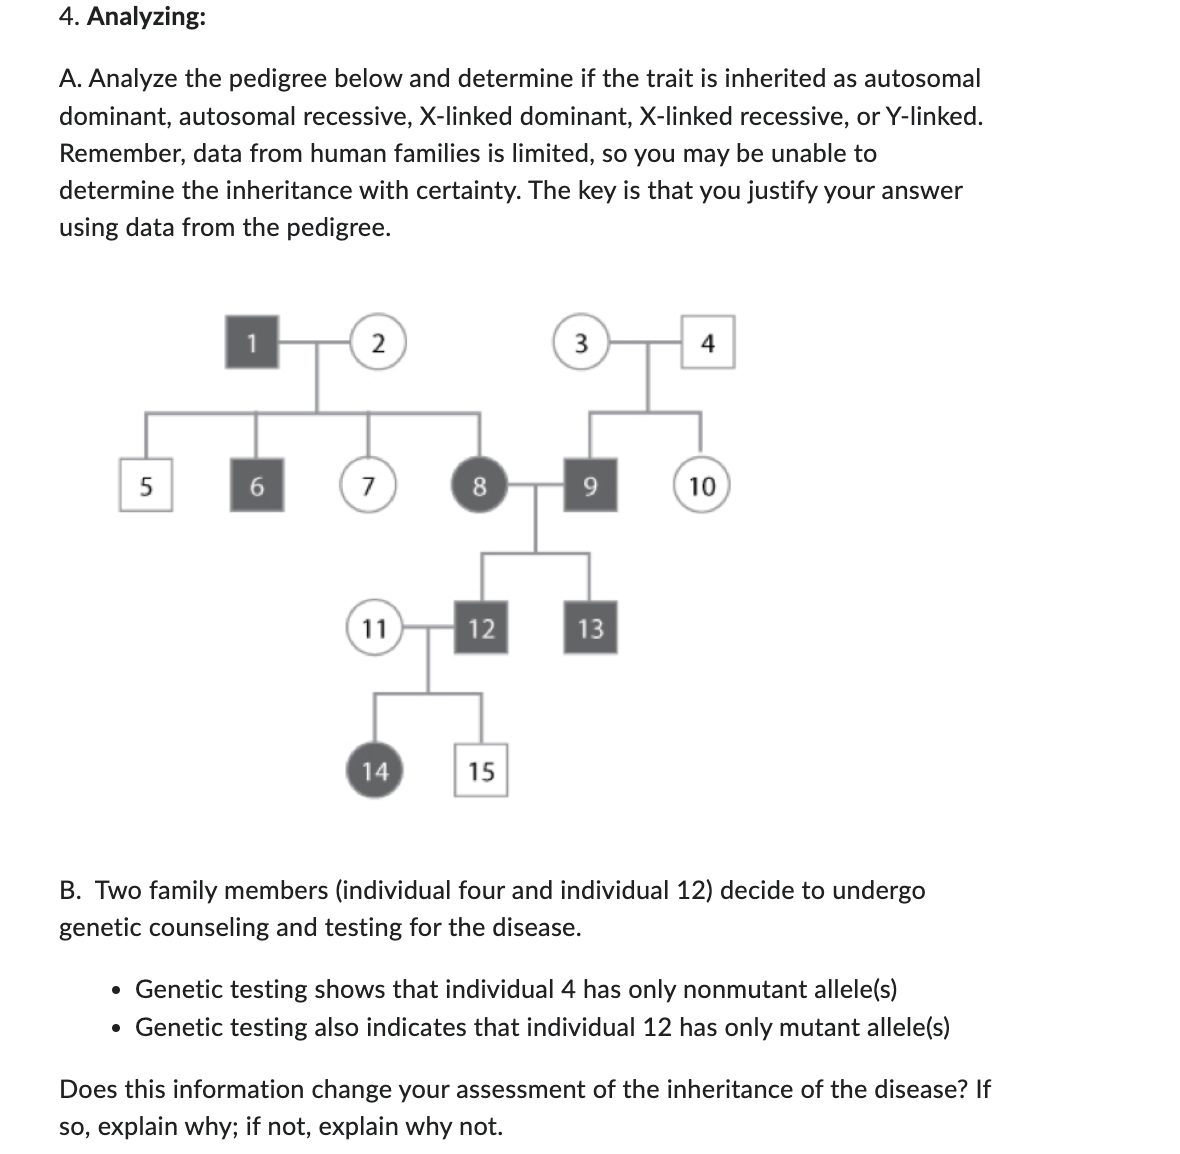 4. Analyzing:
A. Analyze the pedigree below and determine if the trait is inherited as autosomal
dominant, autosomal recessive, X-linked dominant, X-linked recessive, or Y-linked.
Remember, data from human families is limited, so you may be unable to
determine the inheritance with certainty. The key is that you justify your answer
using data from the pedigree.
5
6
2
7
11
14
8
12
15
9
13
4
10
B. Two family members (individual four and individual 12) decide to undergo
genetic counseling and testing for the disease.
• Genetic testing shows that individual 4 has only nonmutant allele(s)
• Genetic testing also indicates that individual 12 has only mutant allele(s)
Does this information change your assessment of the inheritance of the disease? If
so, explain why; if not, explain why not.